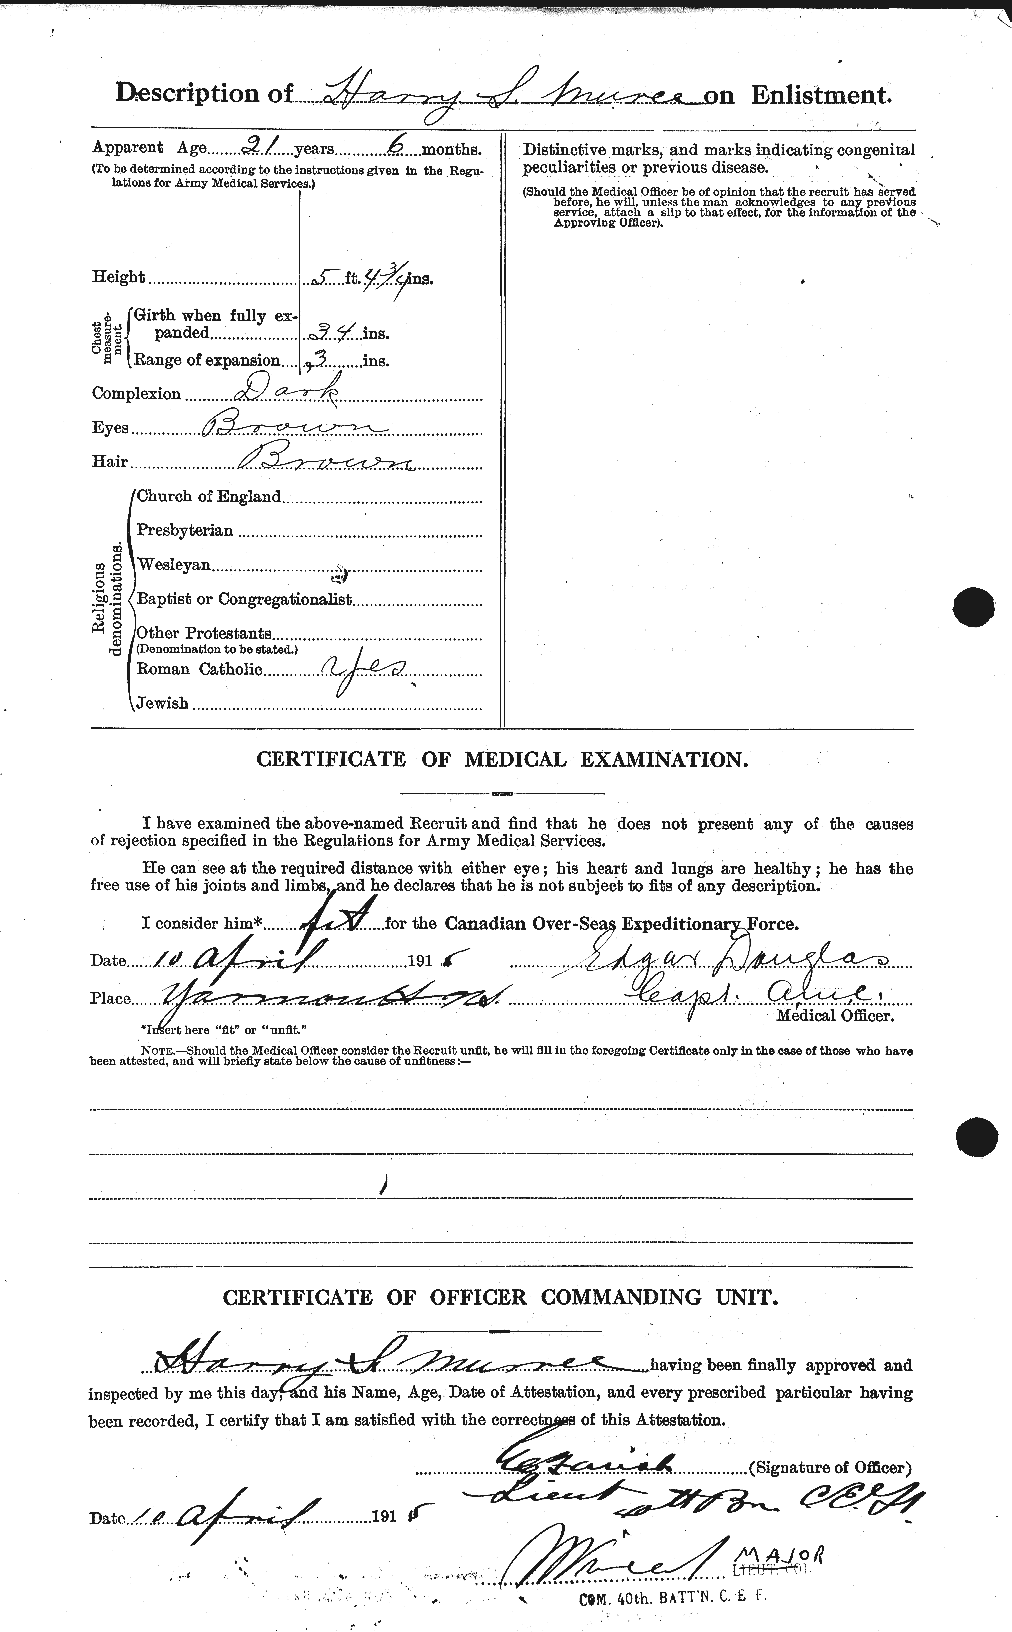 Personnel Records of the First World War - CEF 514343b